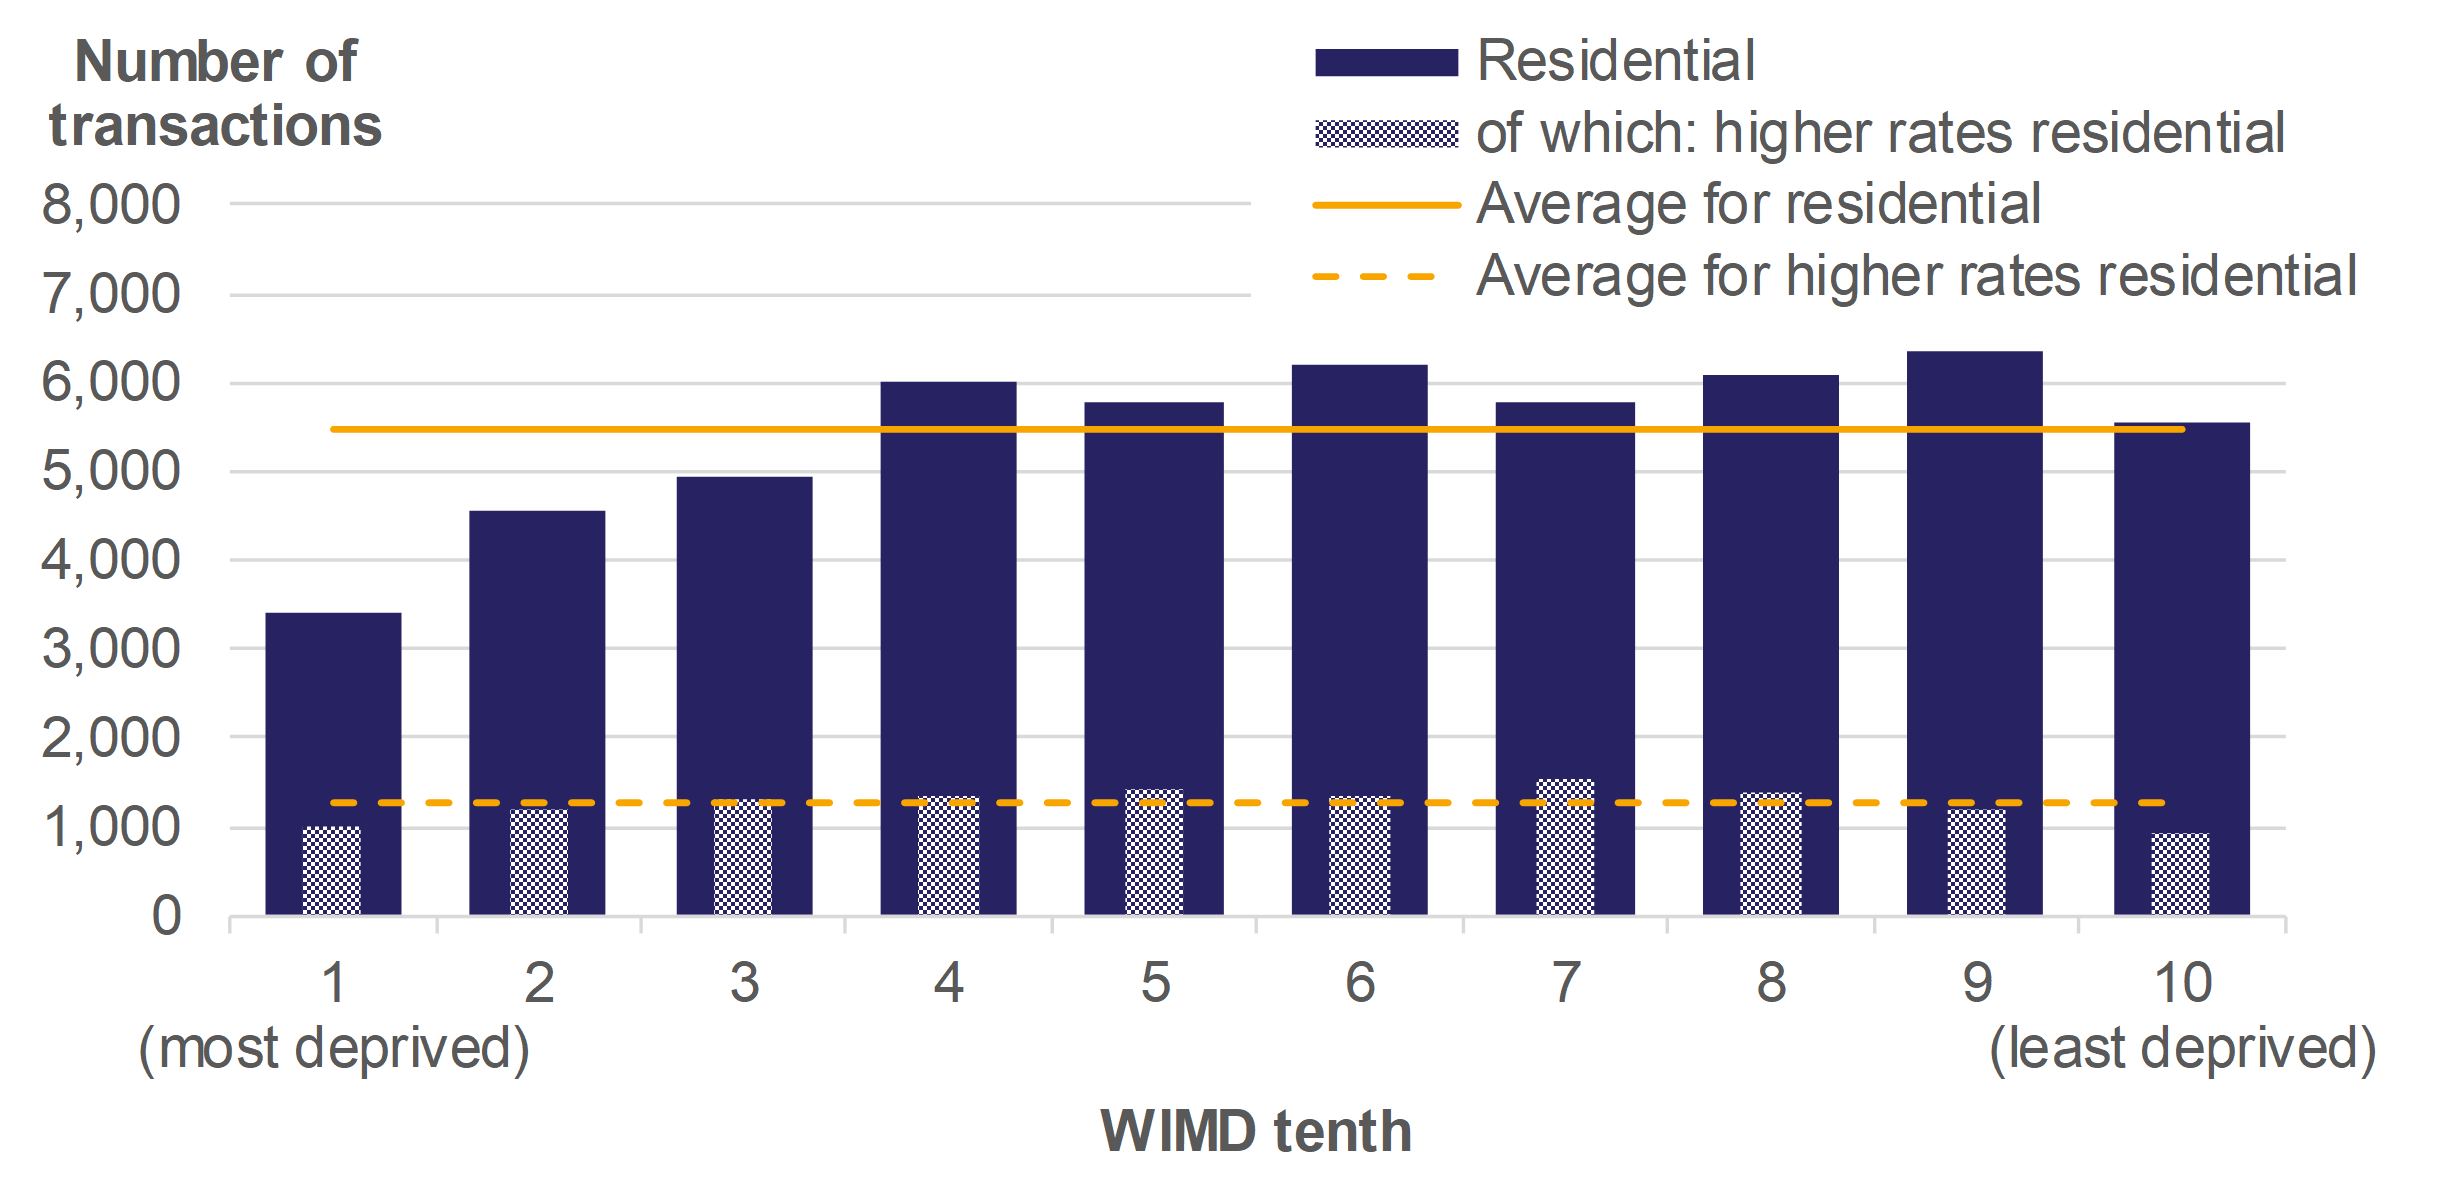 Figure 9.1 shows the number of residential transactions and at the higher rates, by WIMD tenths, for April 2018 to March 2019. Average values over all WIMD tenths are also presented.